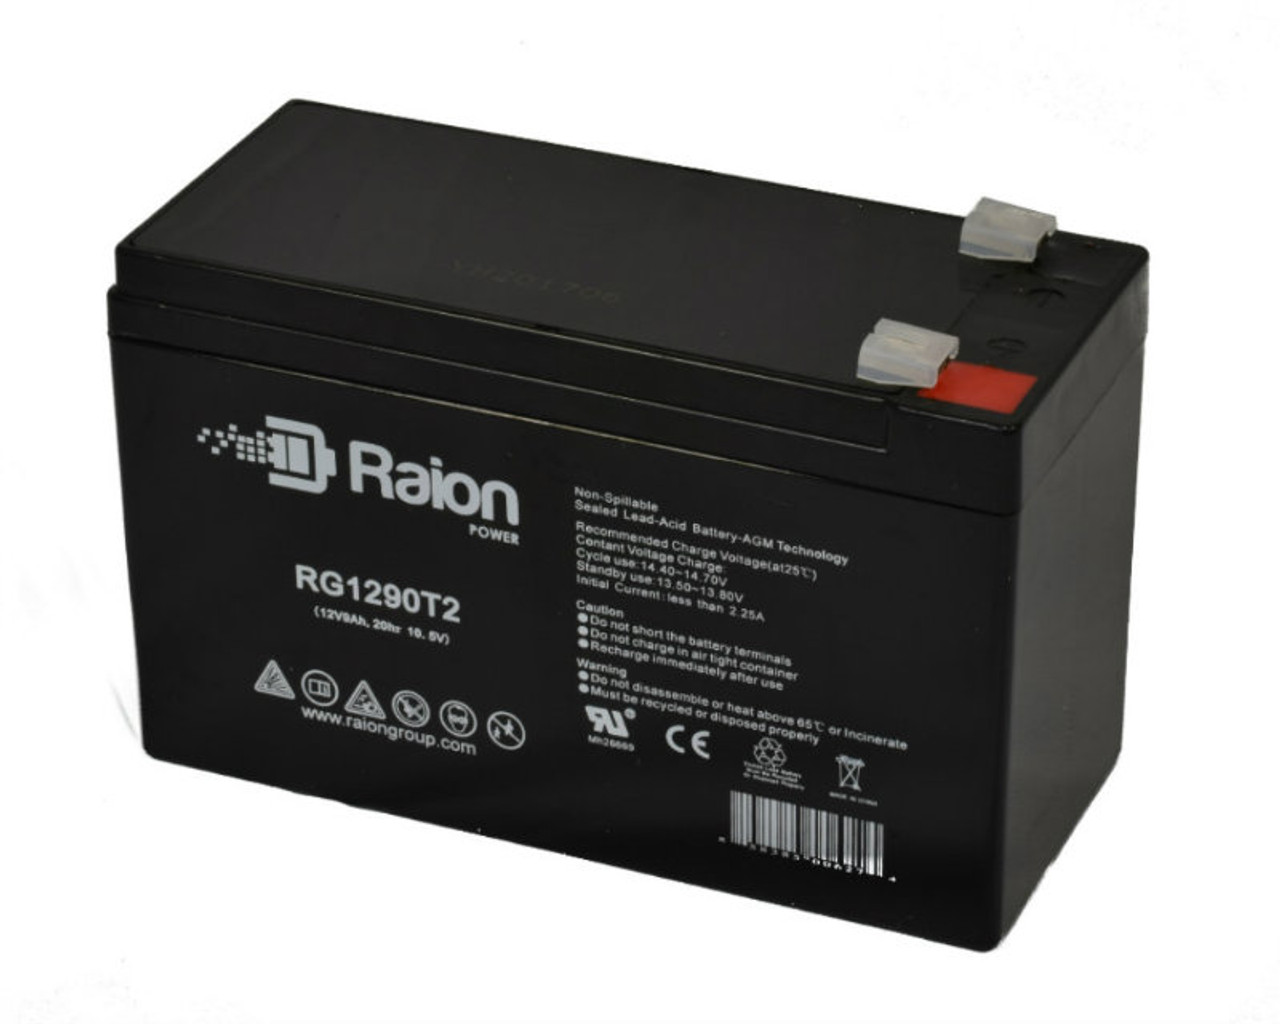 Raion Power Replacement 12V 9Ah Battery for Energenie BAT-12V9AH - 1 Pack